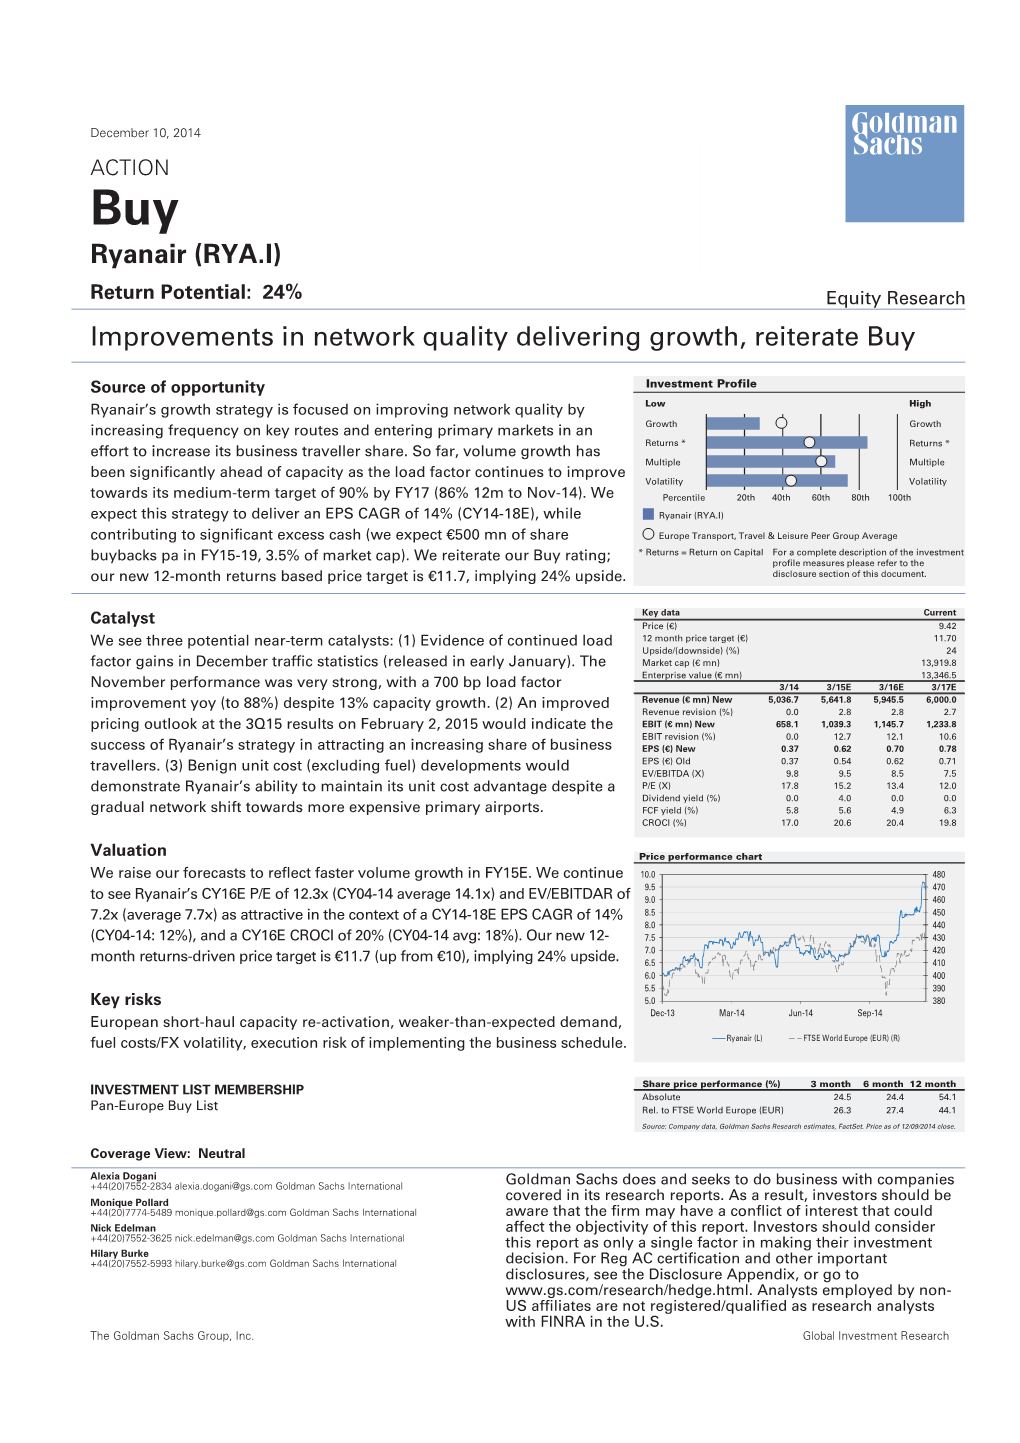 (RYA.I) Improvements in Network Quality Delivering Growth, Reiterate